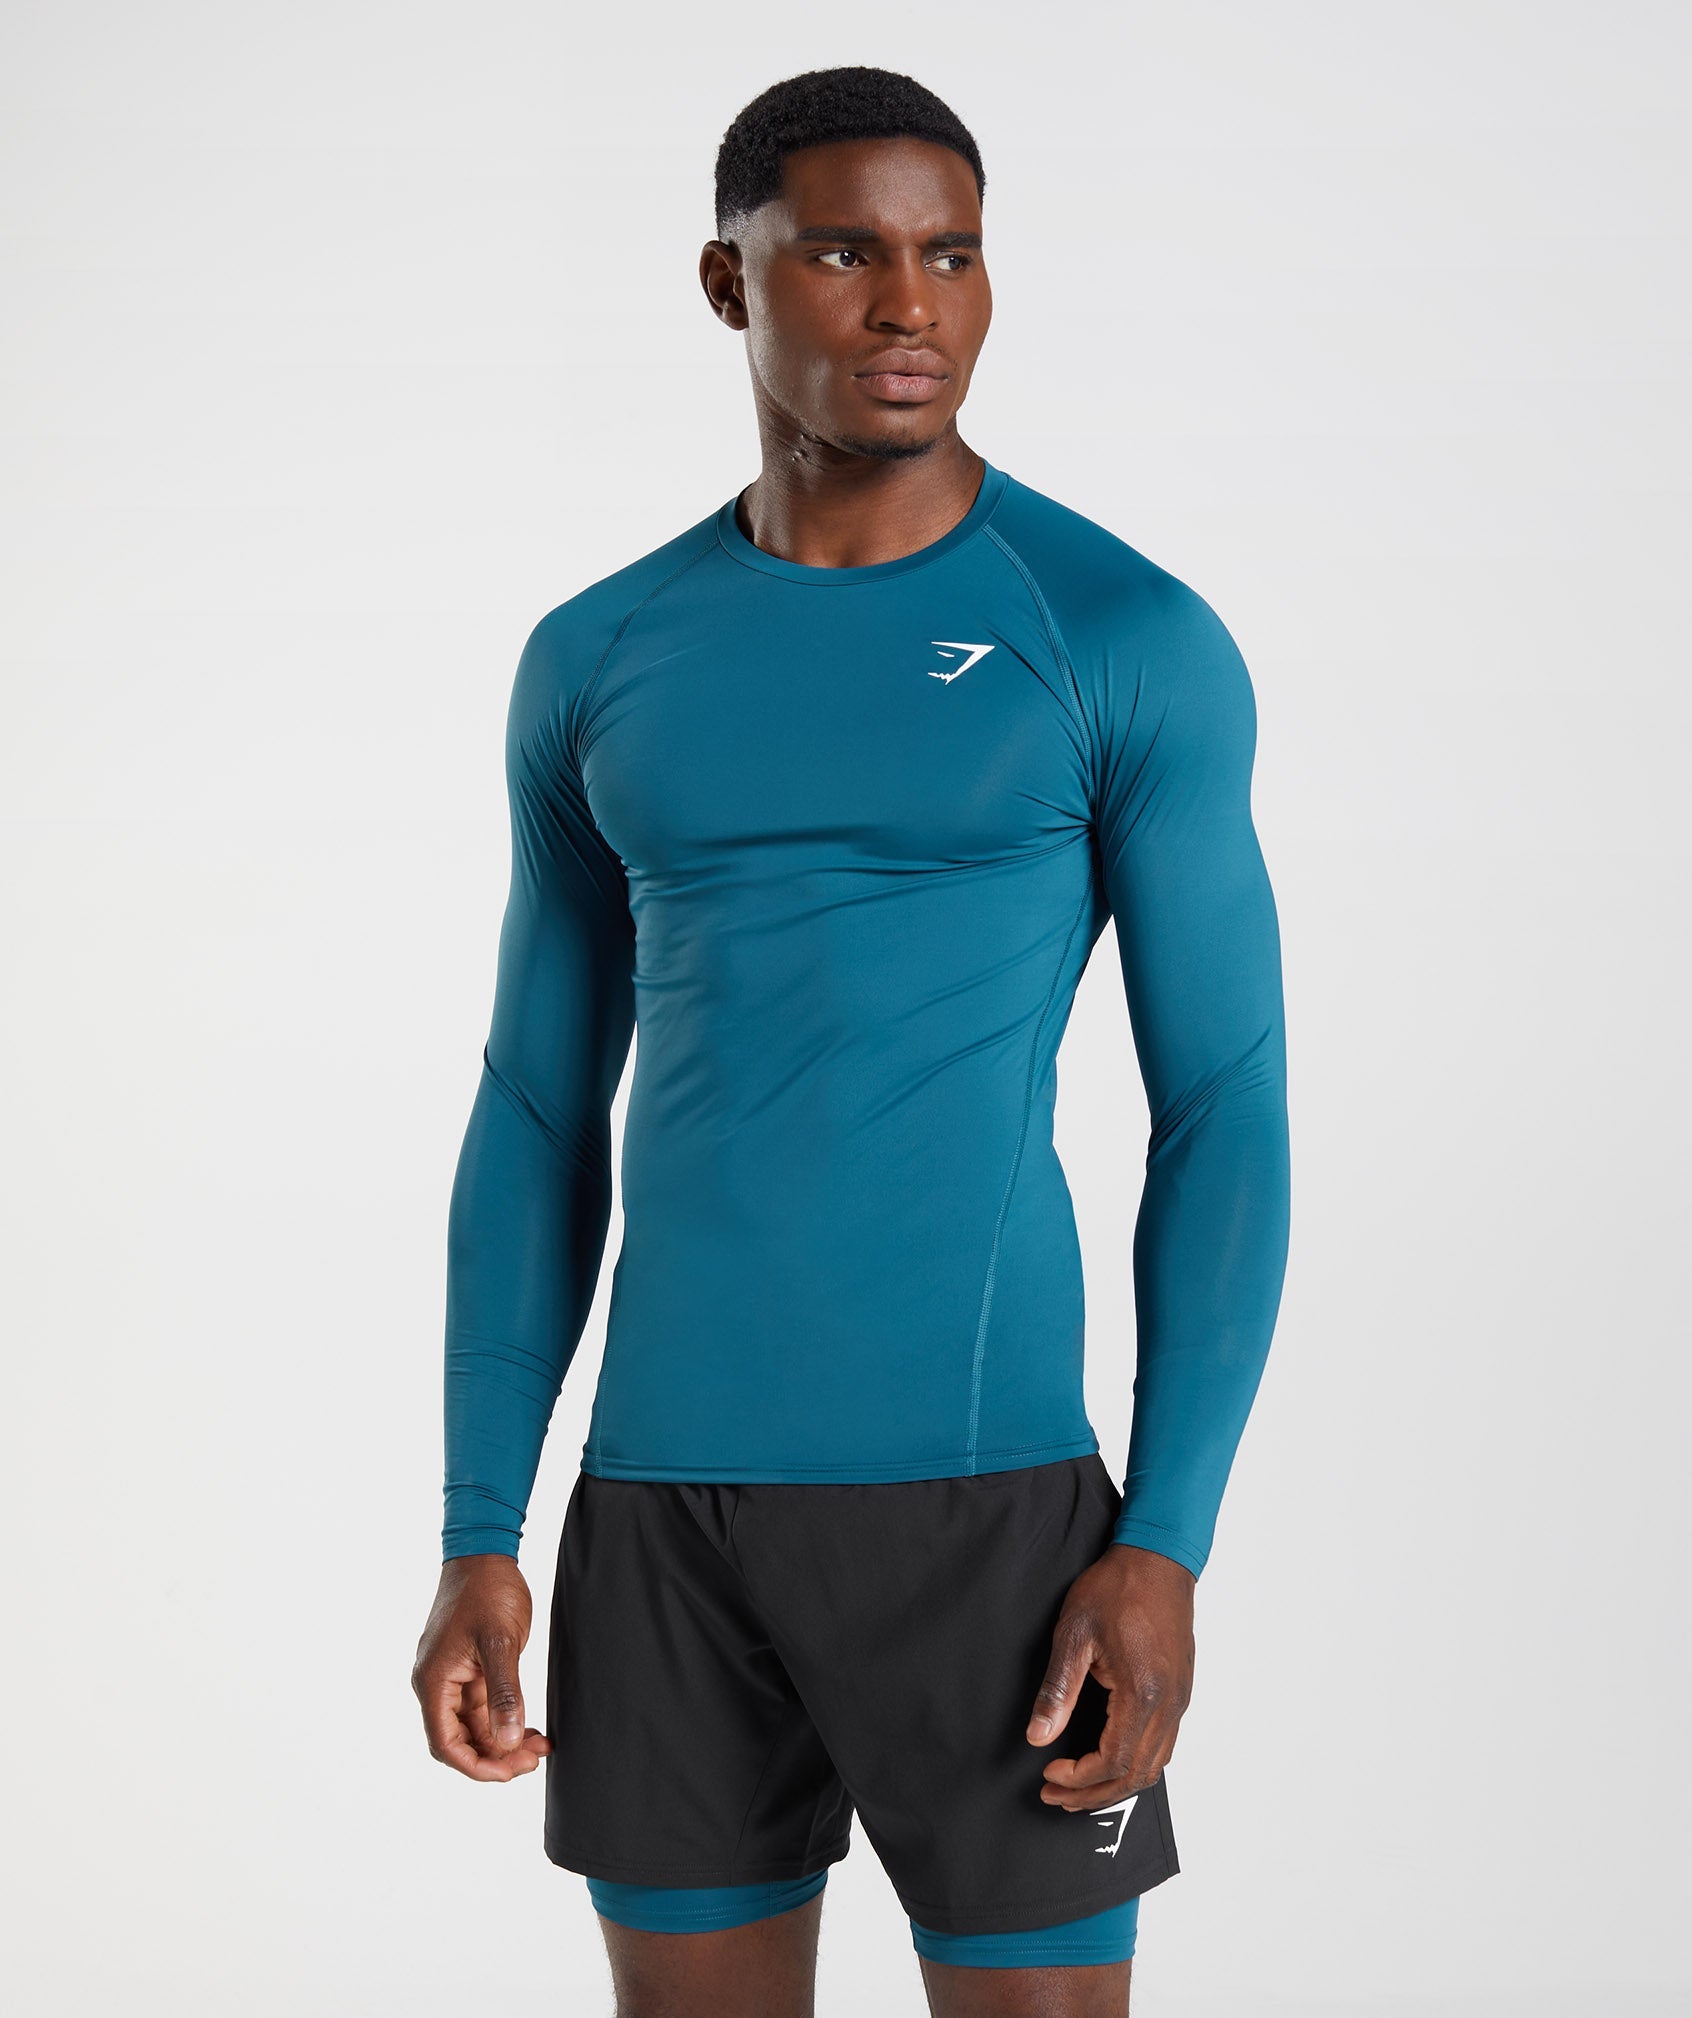 Element Baselayer Long Sleeve Top in Atlantic Blue - view 1